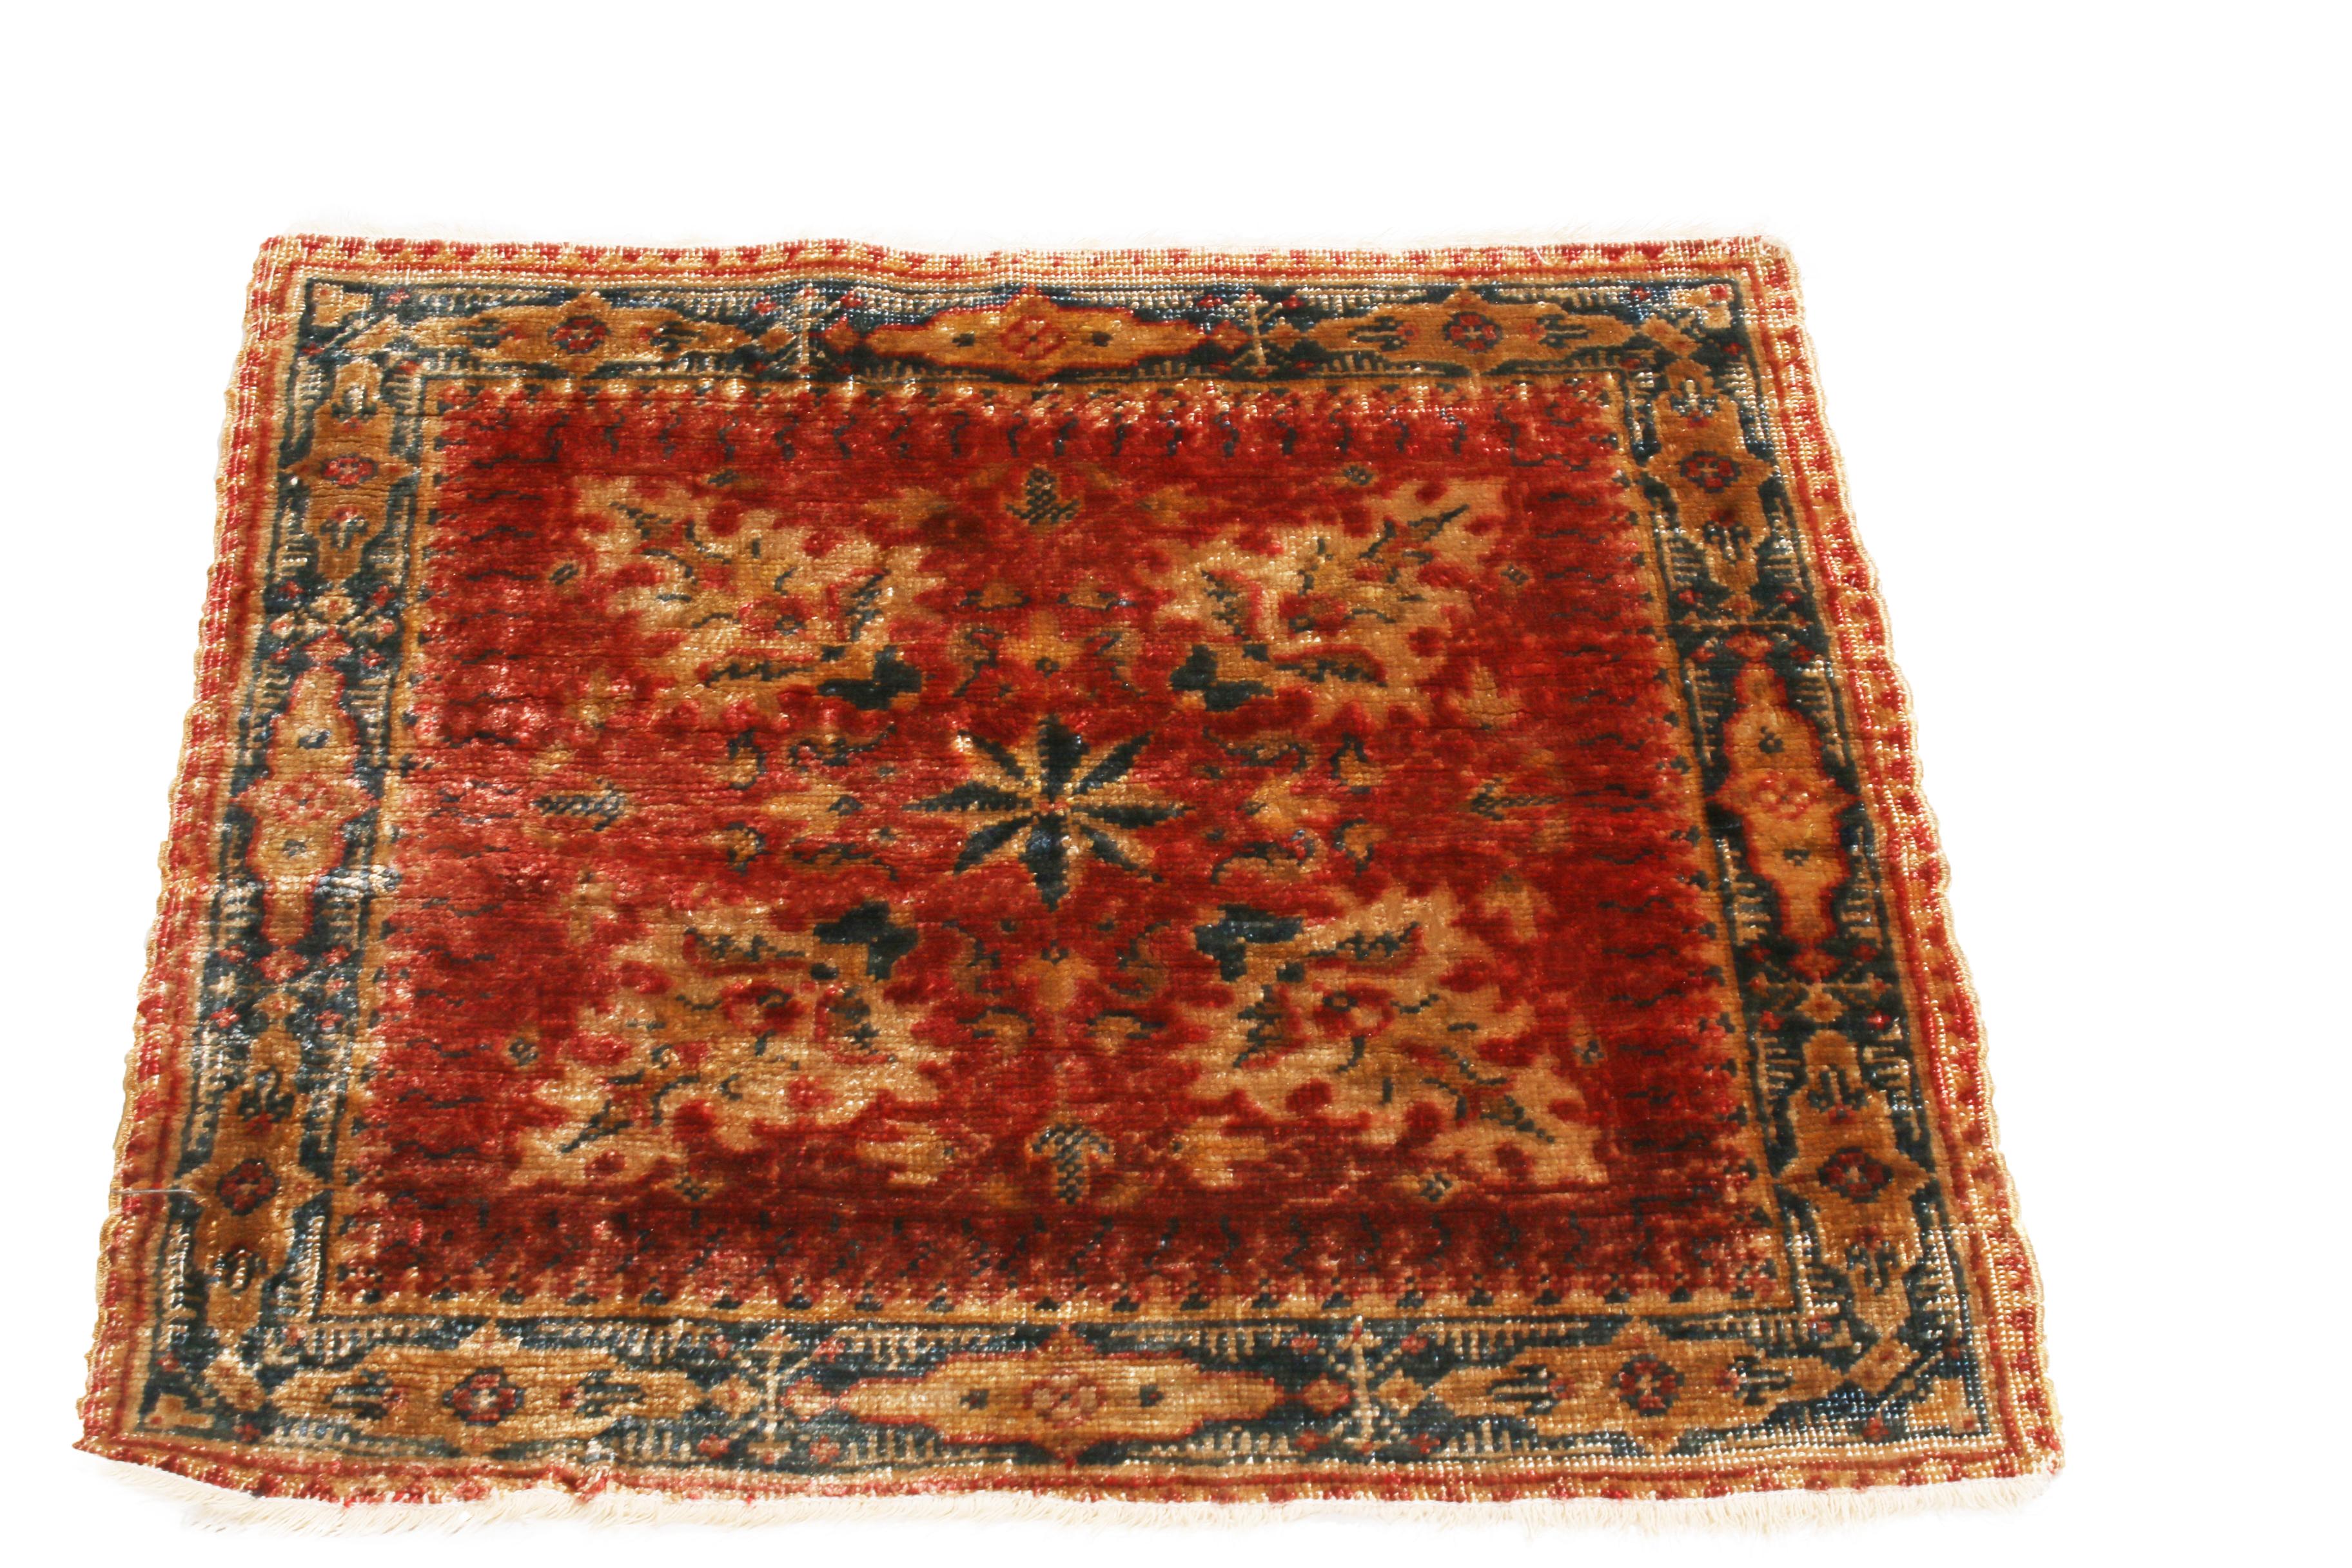 Hand knotted with a luminous, high-quality silk in a combination of vivid and rustic red and beige colourways, this antique Hereke rug originates from Turkey in 1880, crafter in a perfectly square body complemented by its subtly rich royal blue